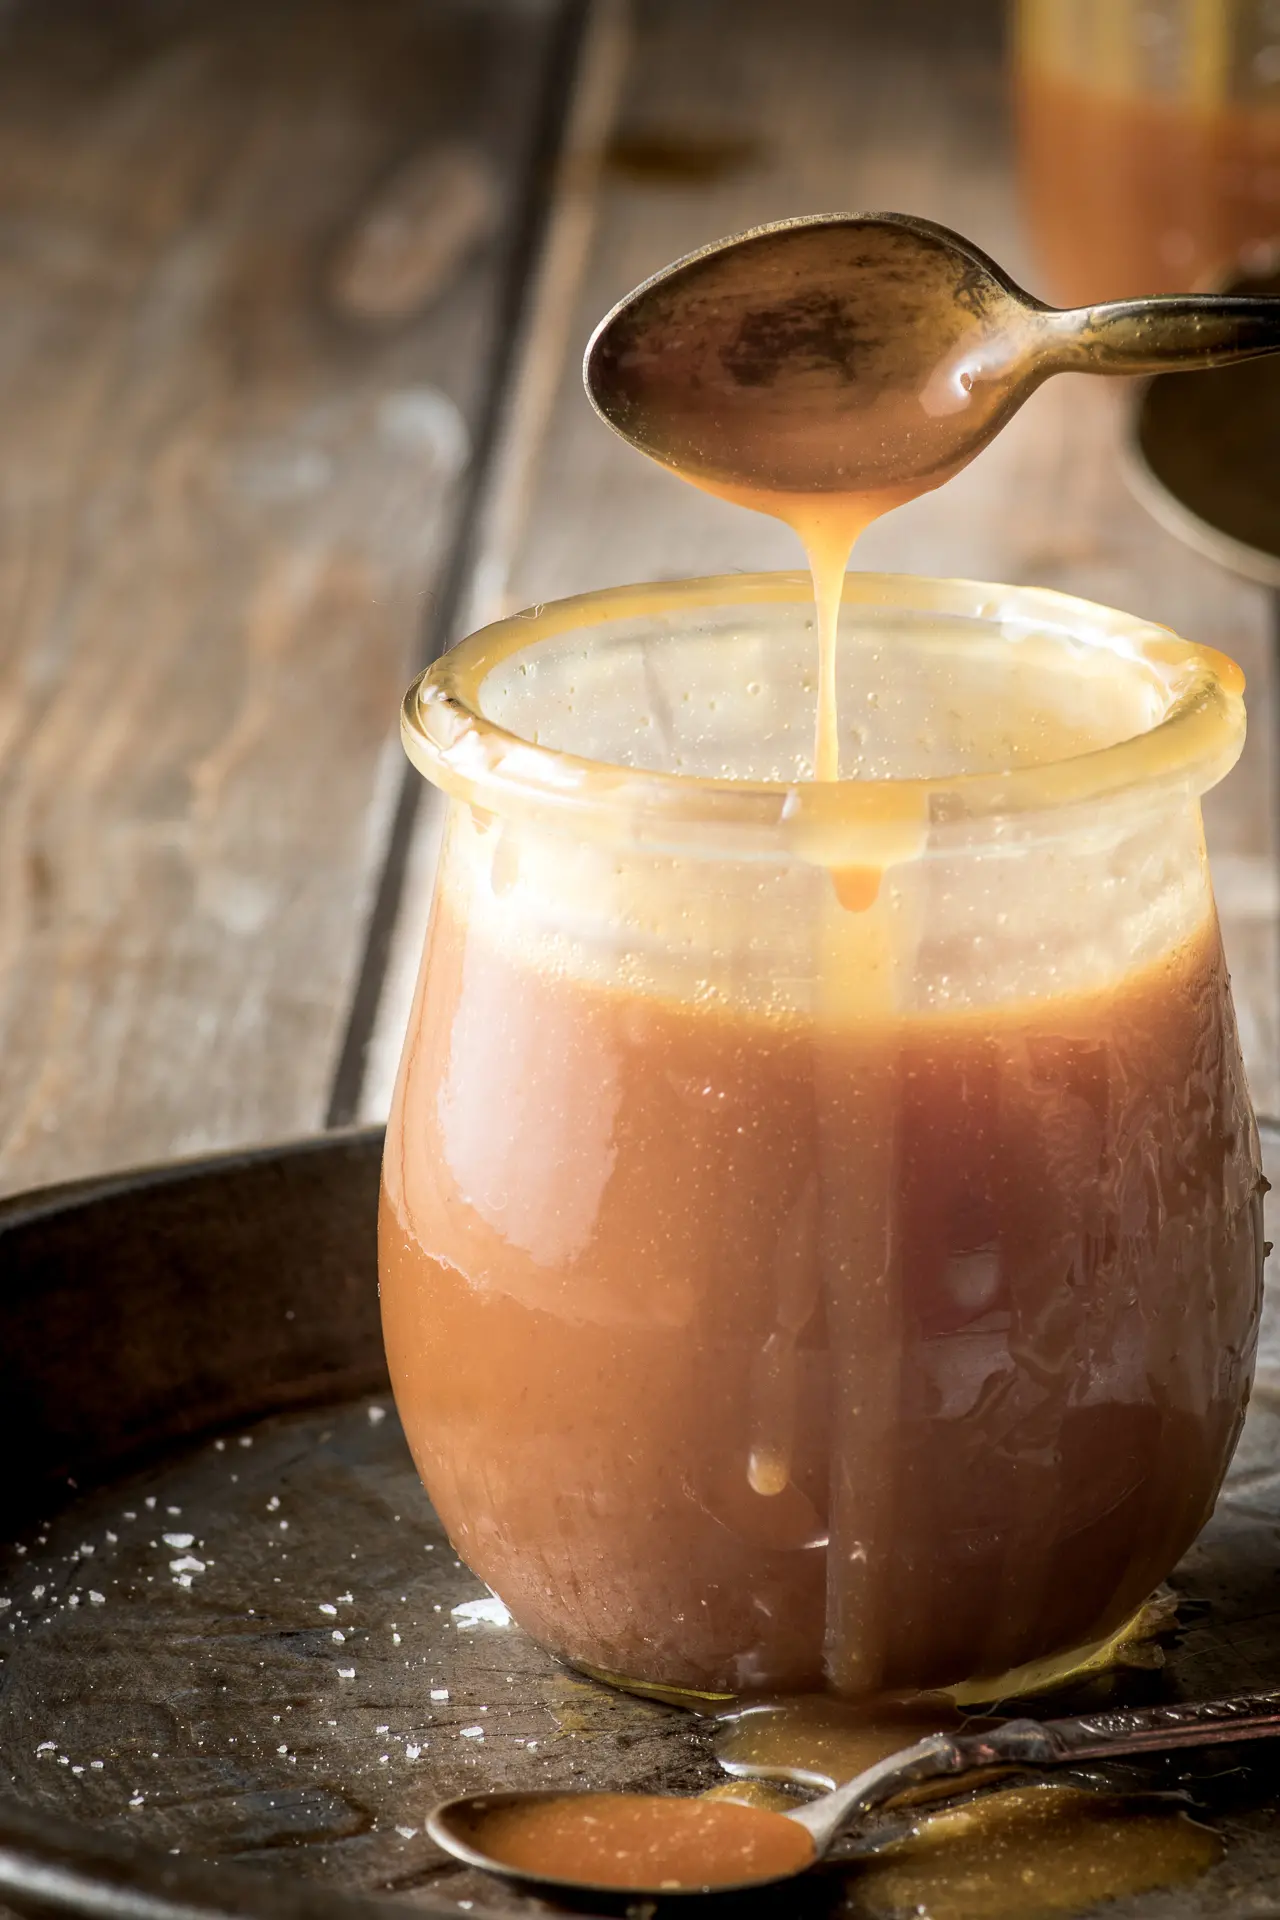 Low carb caramel sauce dripping from a spoon.